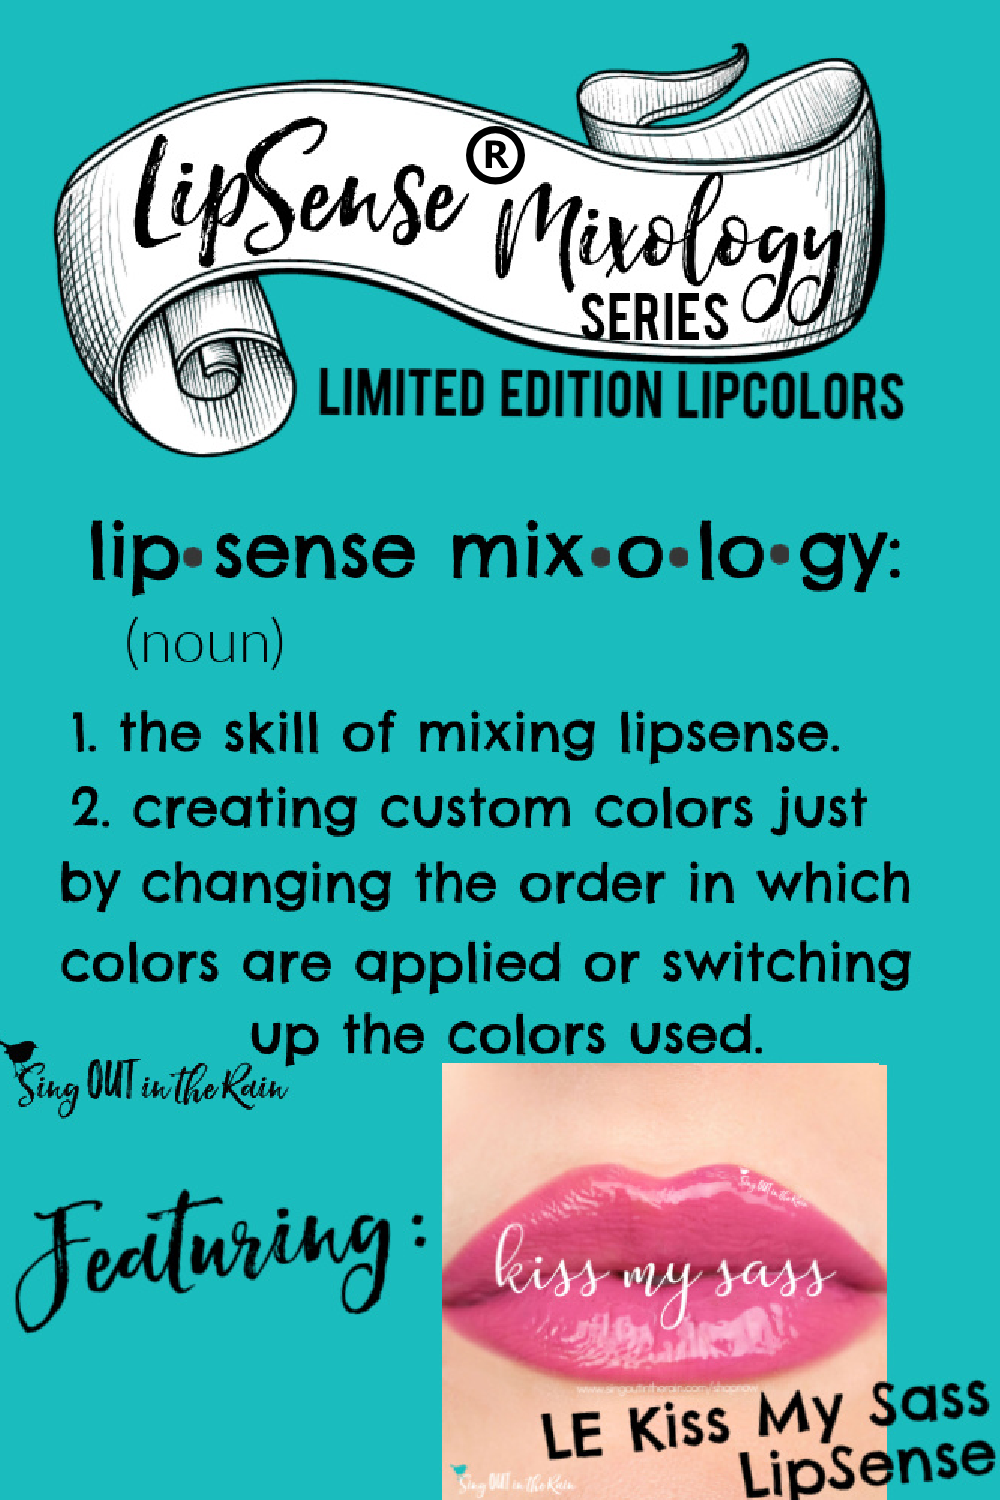 The Ultimate Guide to Kiss My Sass LipSense